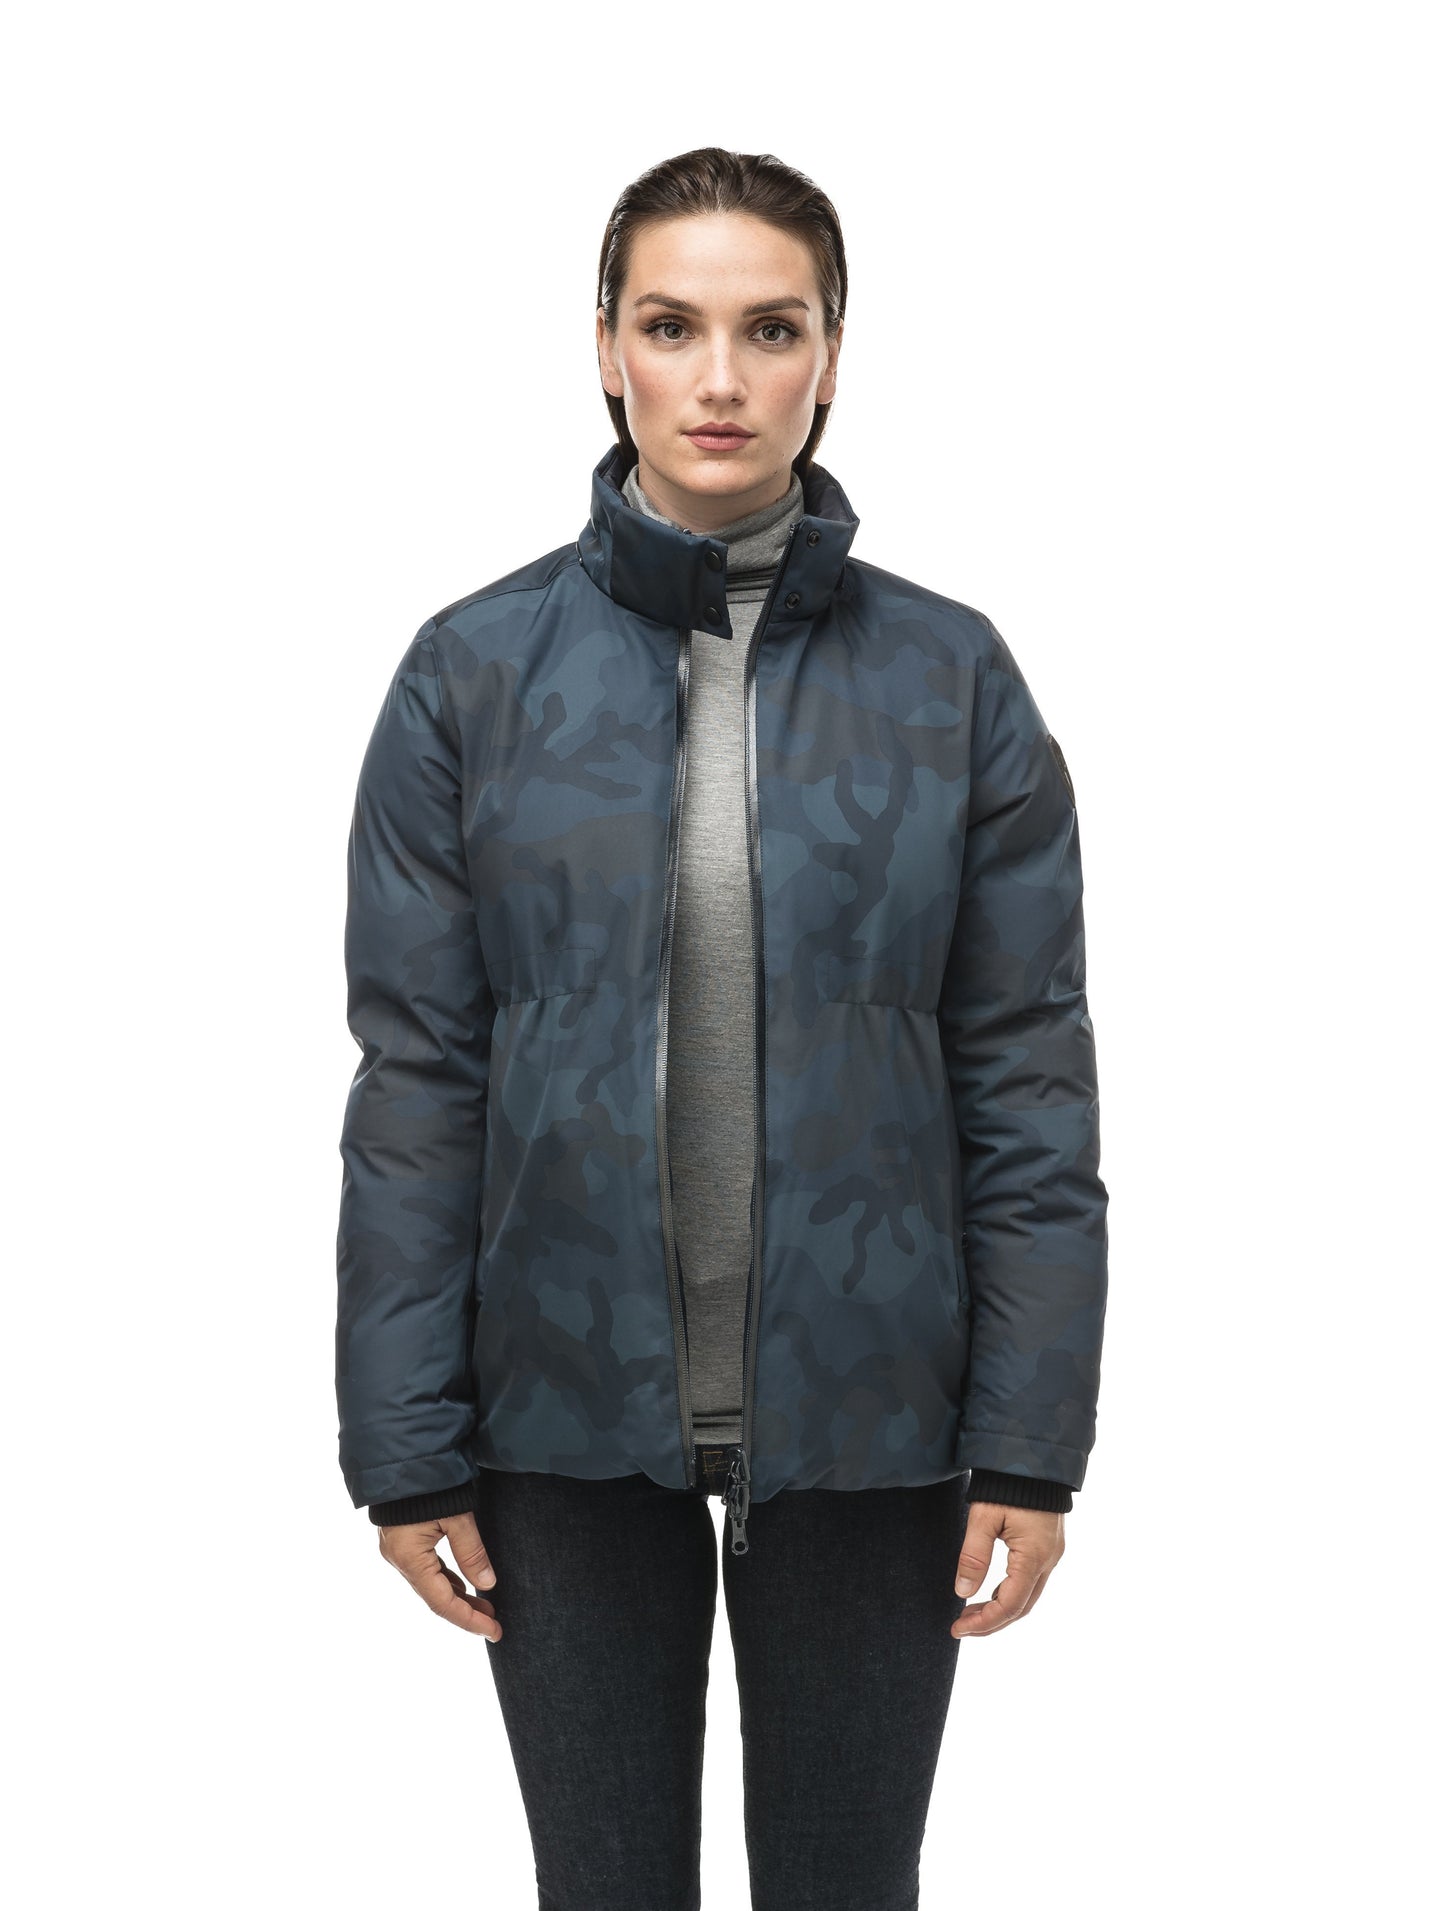 Hip length, reversible women's down filled jacket with waterproof exposed zipper in Navy Camo